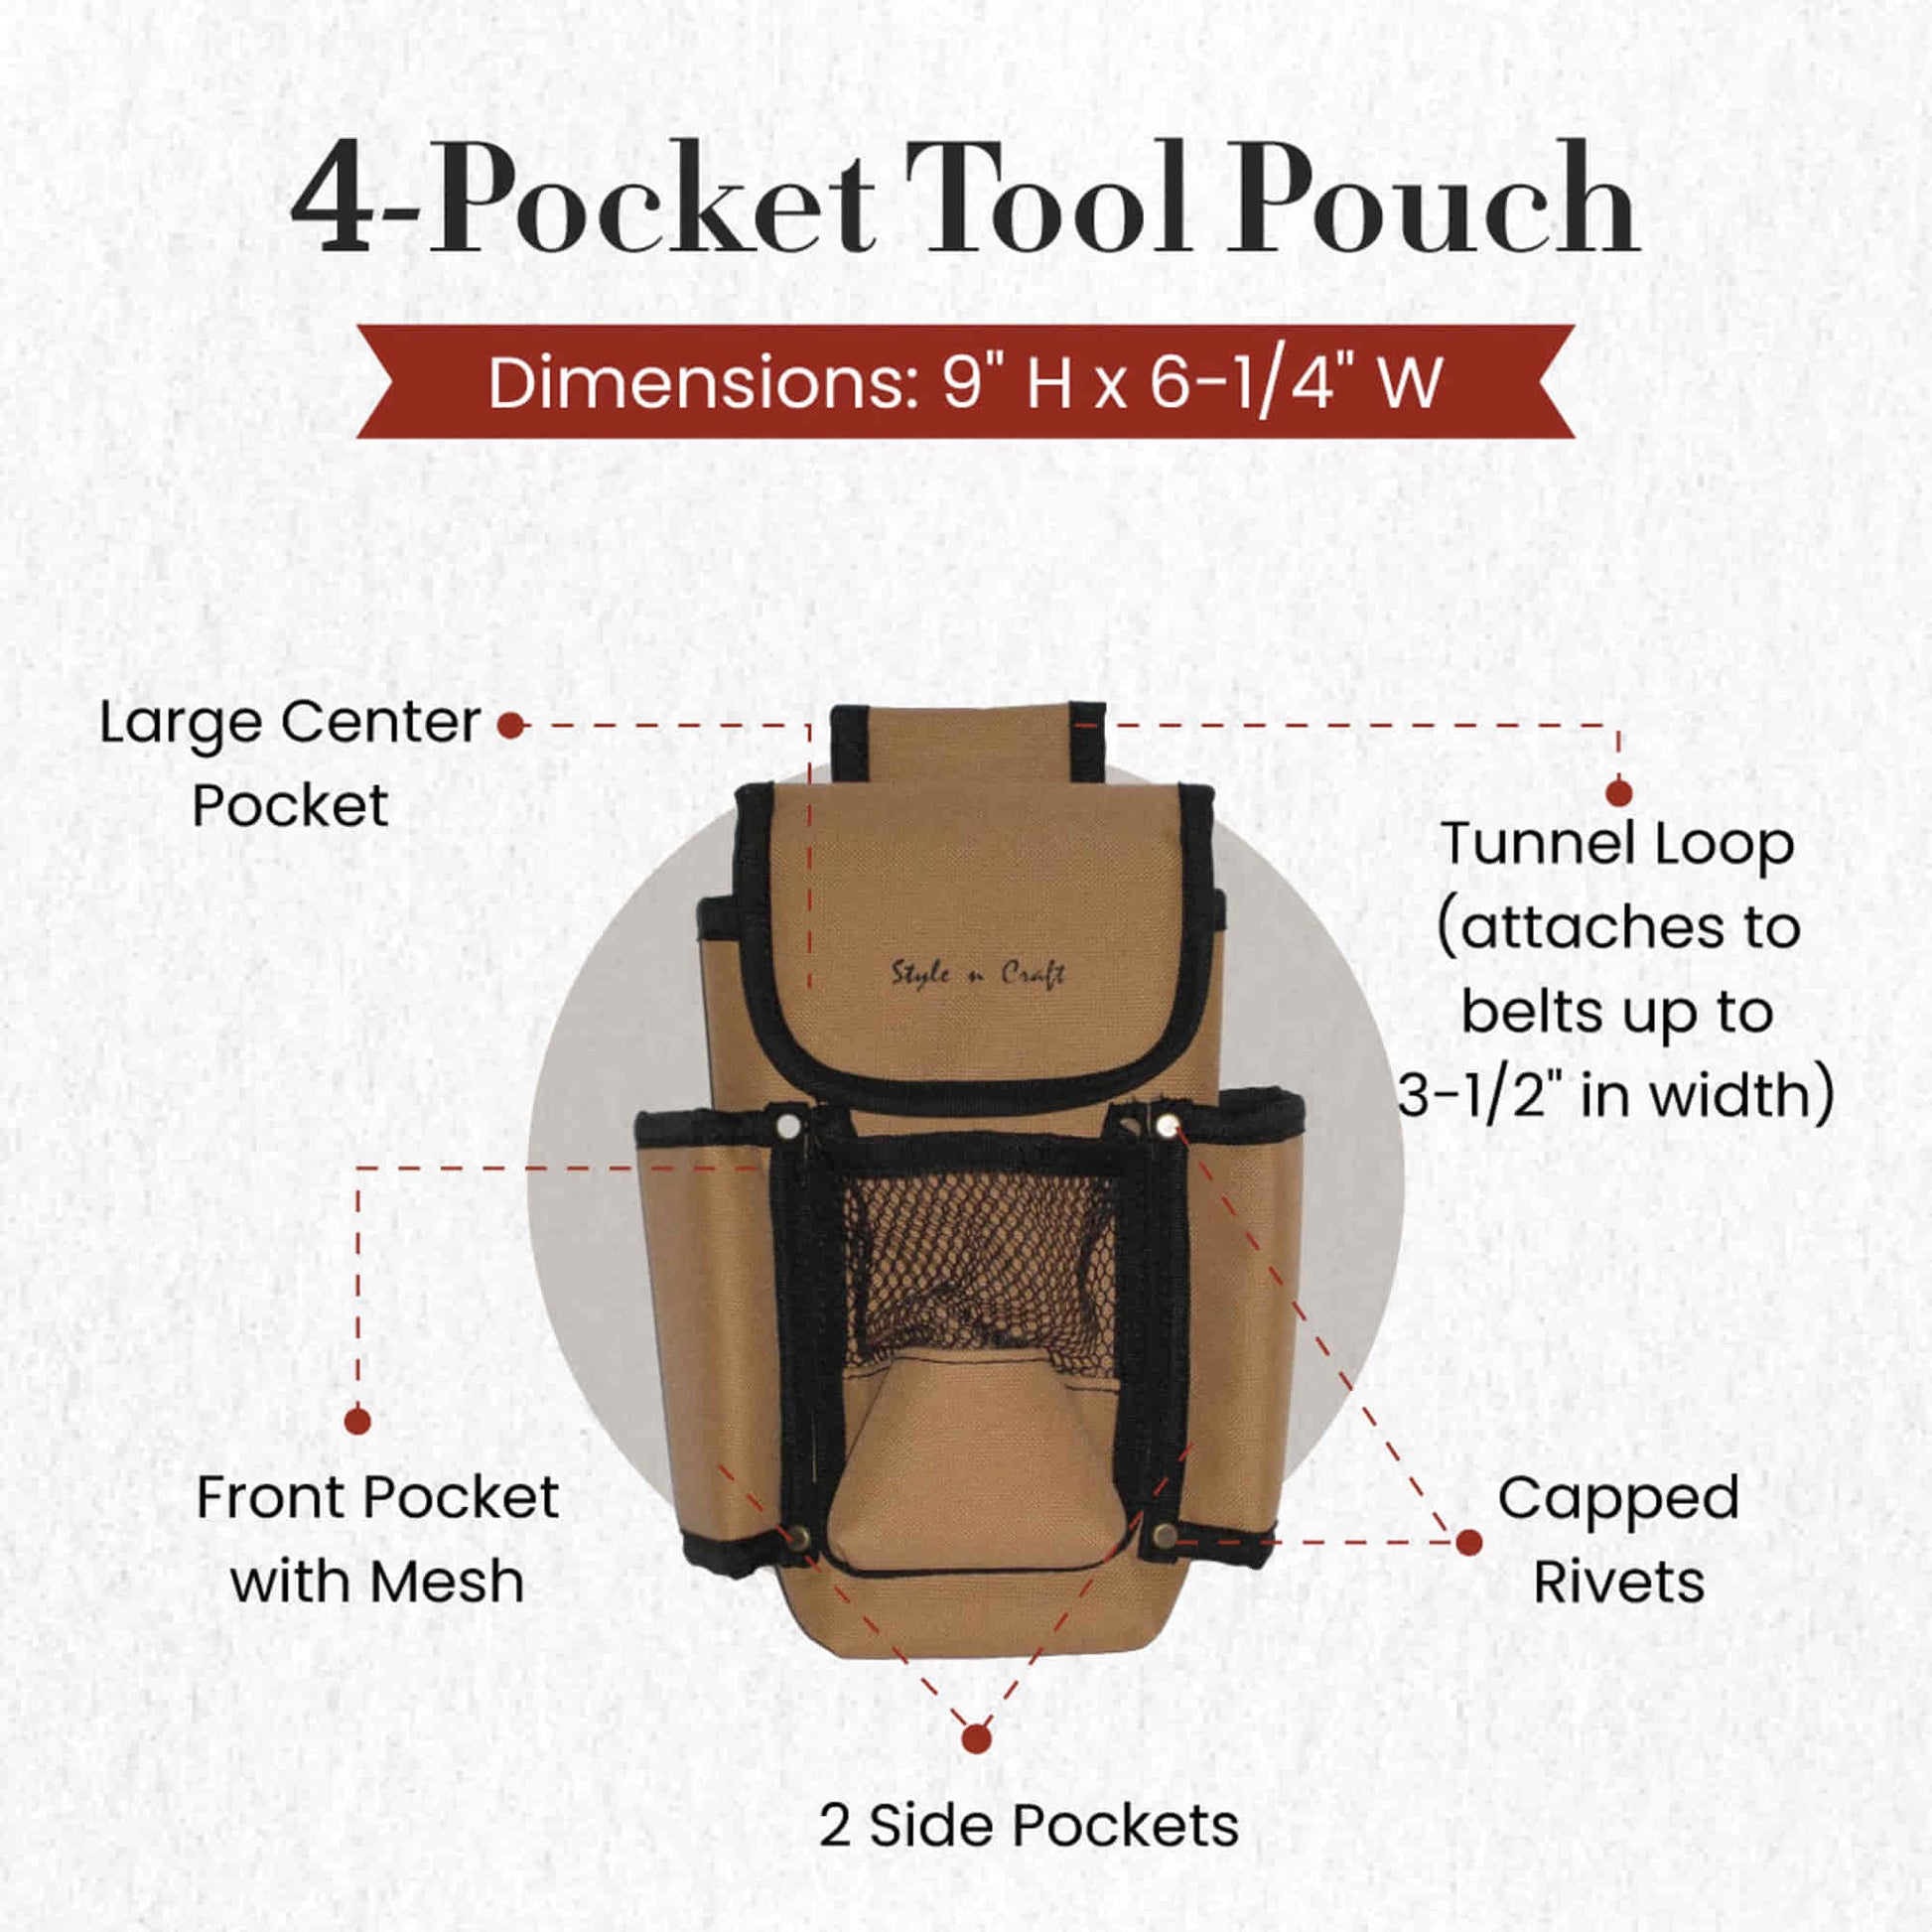 Style n Craft 76023 - 4 Pocket Tool Pouch in Heavy Duty 600D Polyester in Khaki & Black Color Combination - Front View Showing the Details